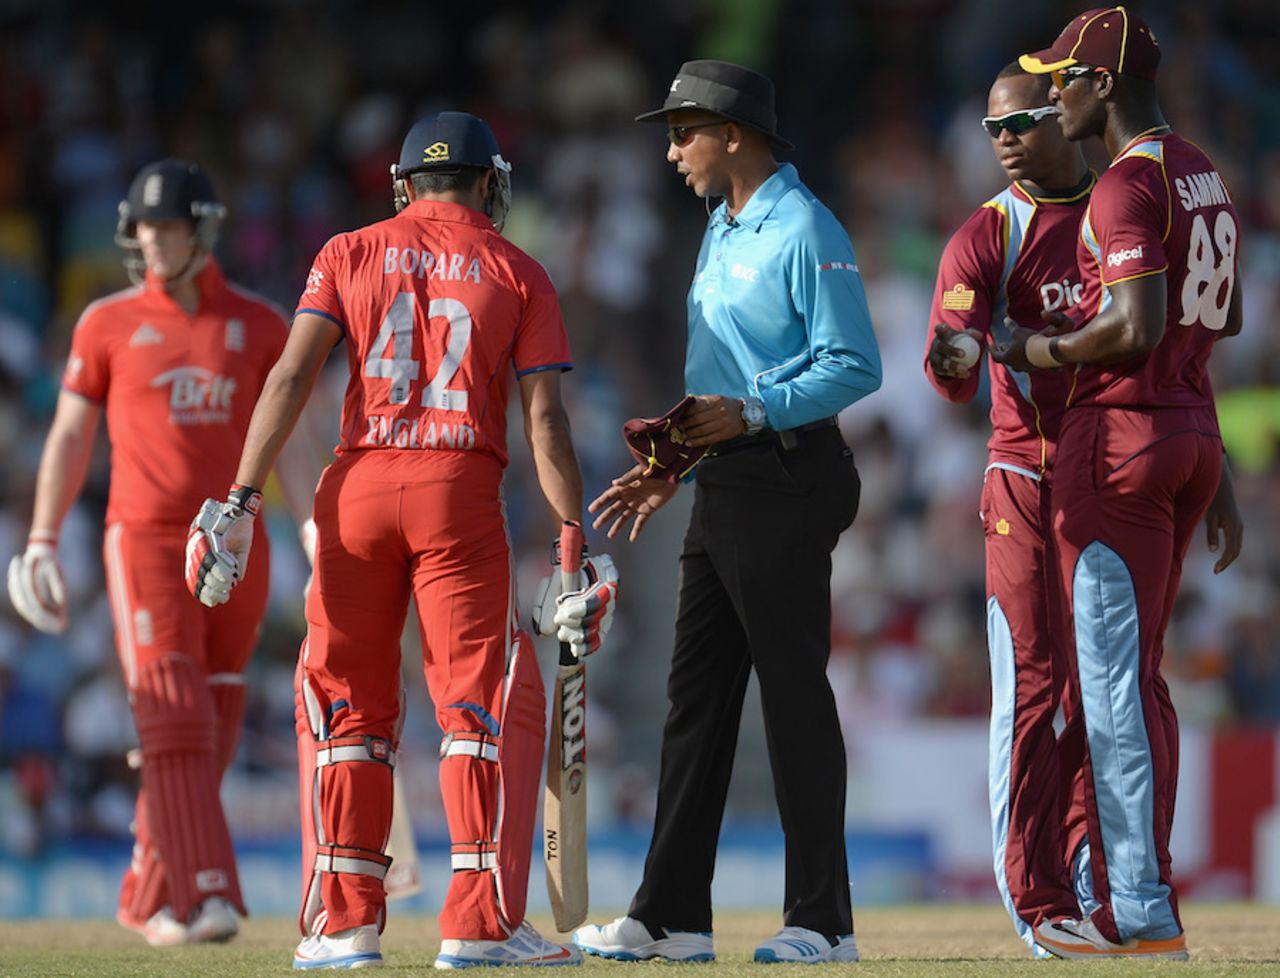 The umpire intervenes to break-up an argument between players, West Indies v England, 1st T20, Barbados, March 9, 2014